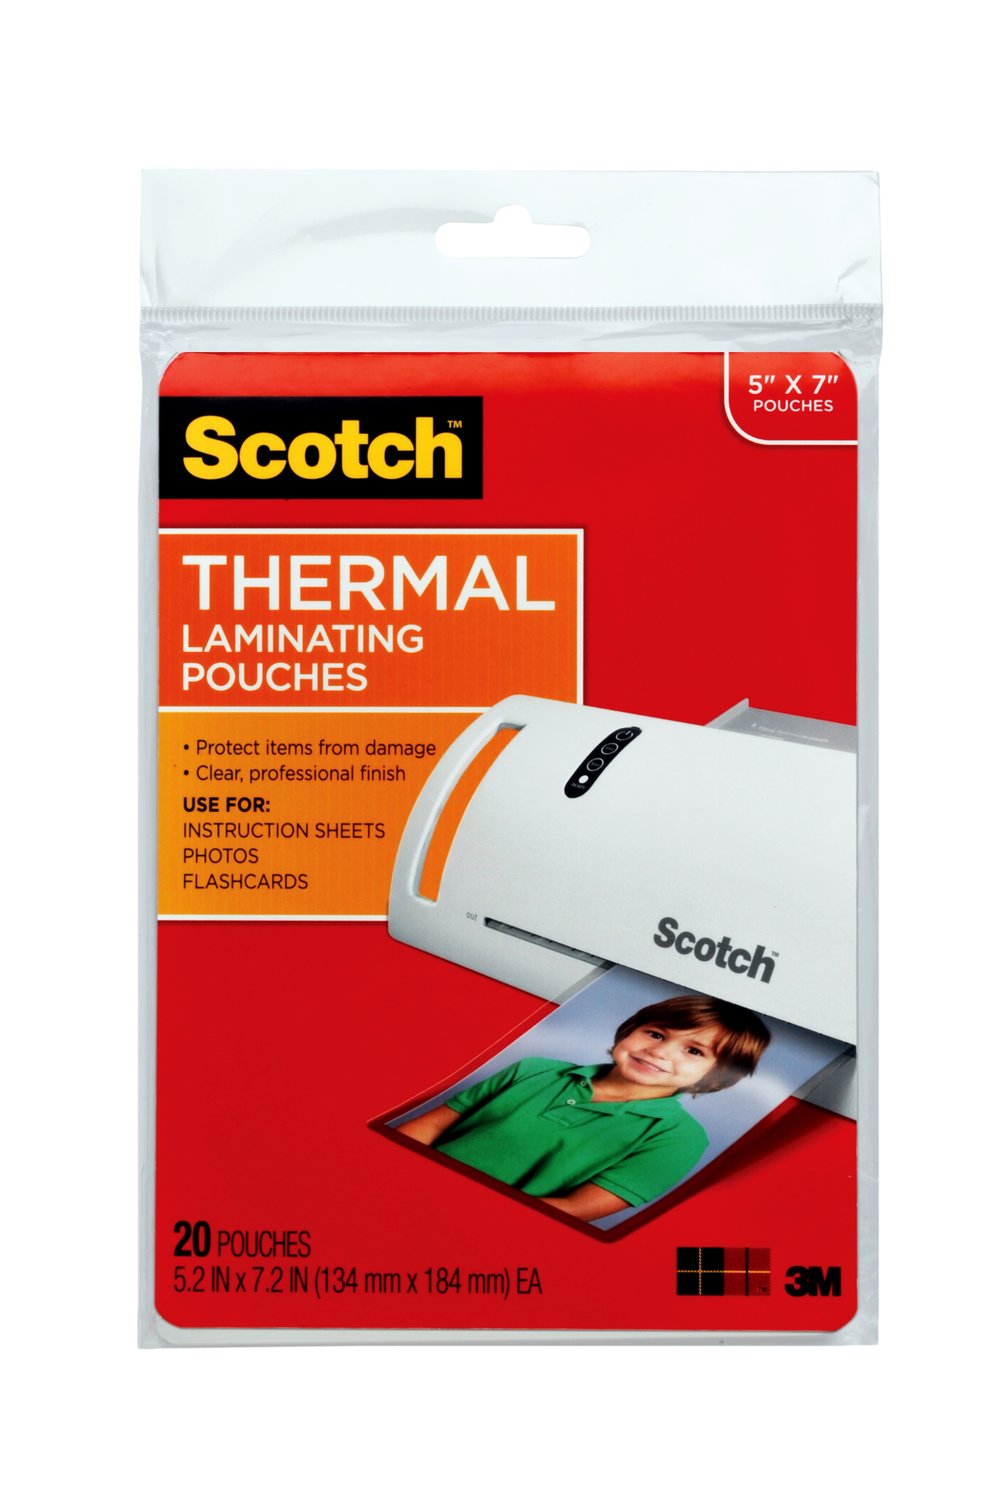 7010369853 - Scotch Thermal Pouches TP5903-20 for items up to 5.27 in x 7.24 in